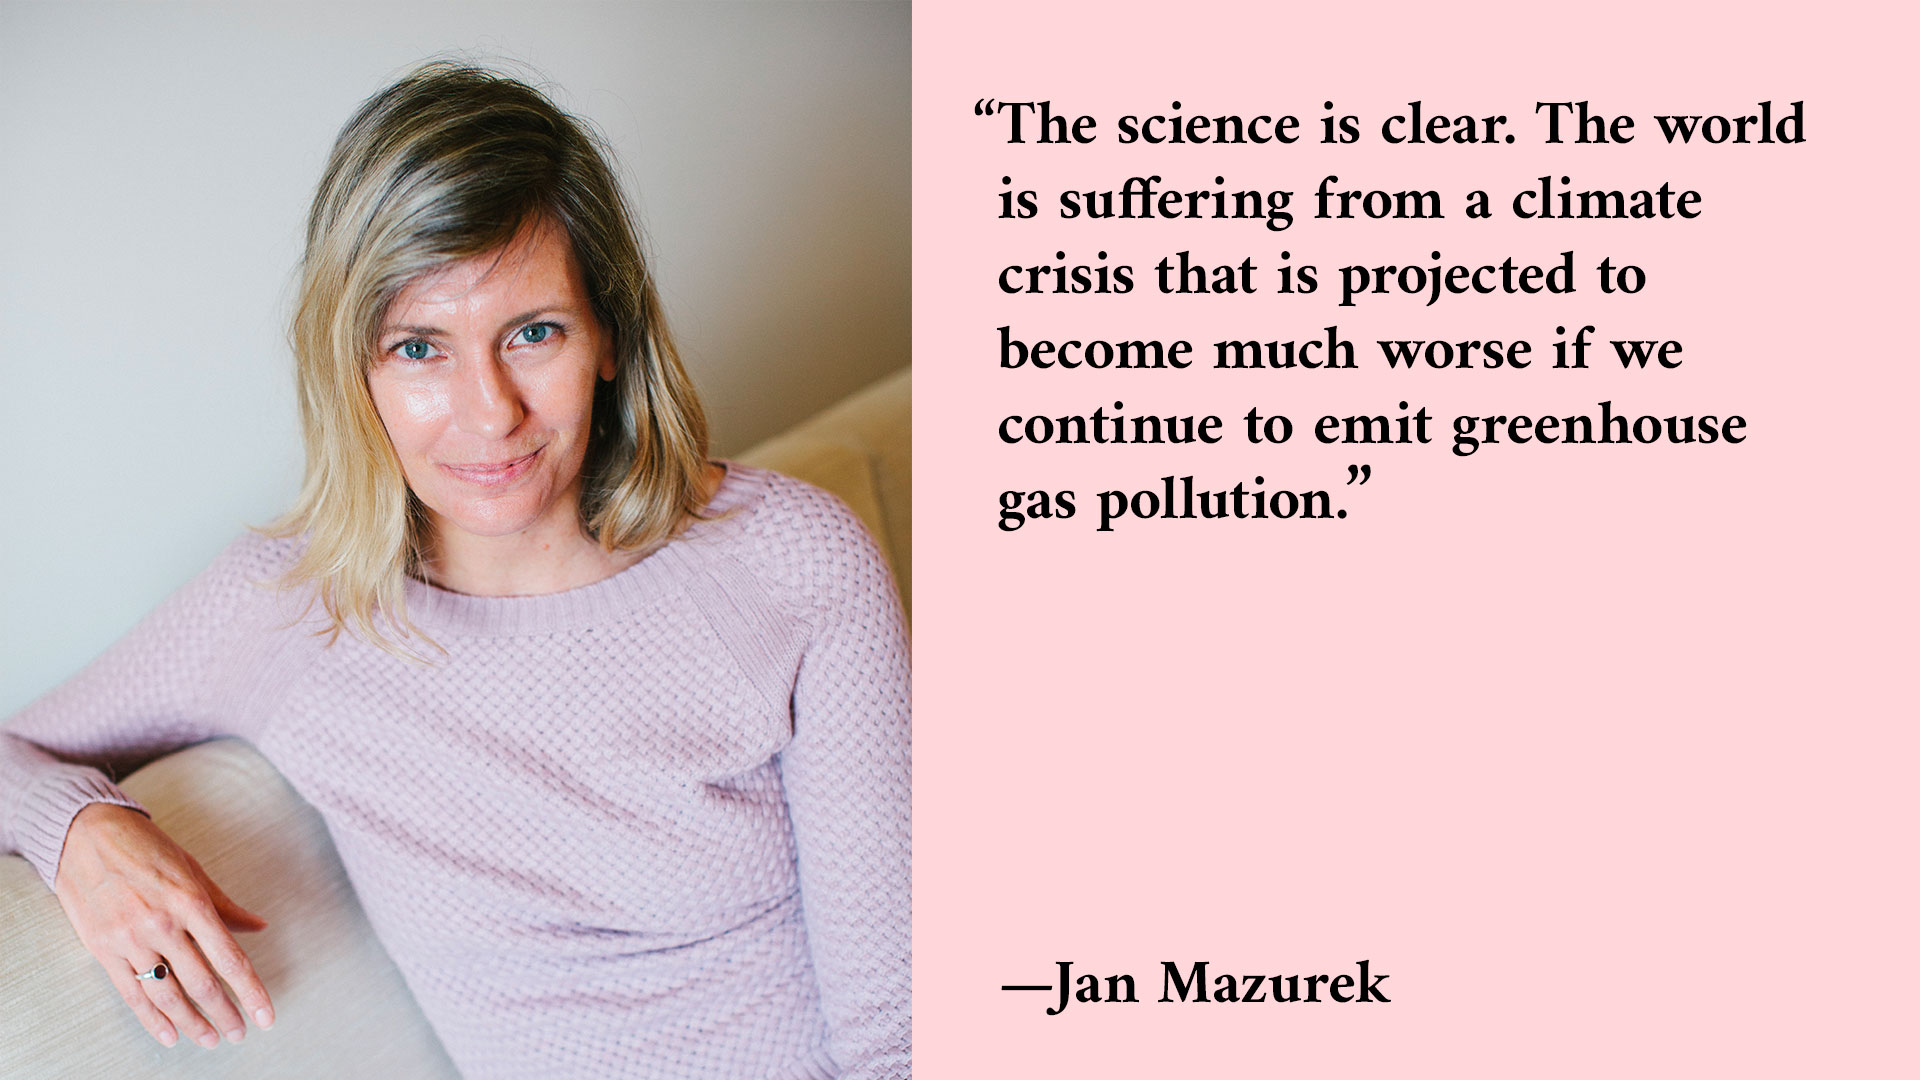 A headshot of a woman next to a quote that reads: The science is clear. The world is suffering from a climate crisis that is projected to become much worse if we continue to emit greenhouse gas pollution. — Jan Mazurek